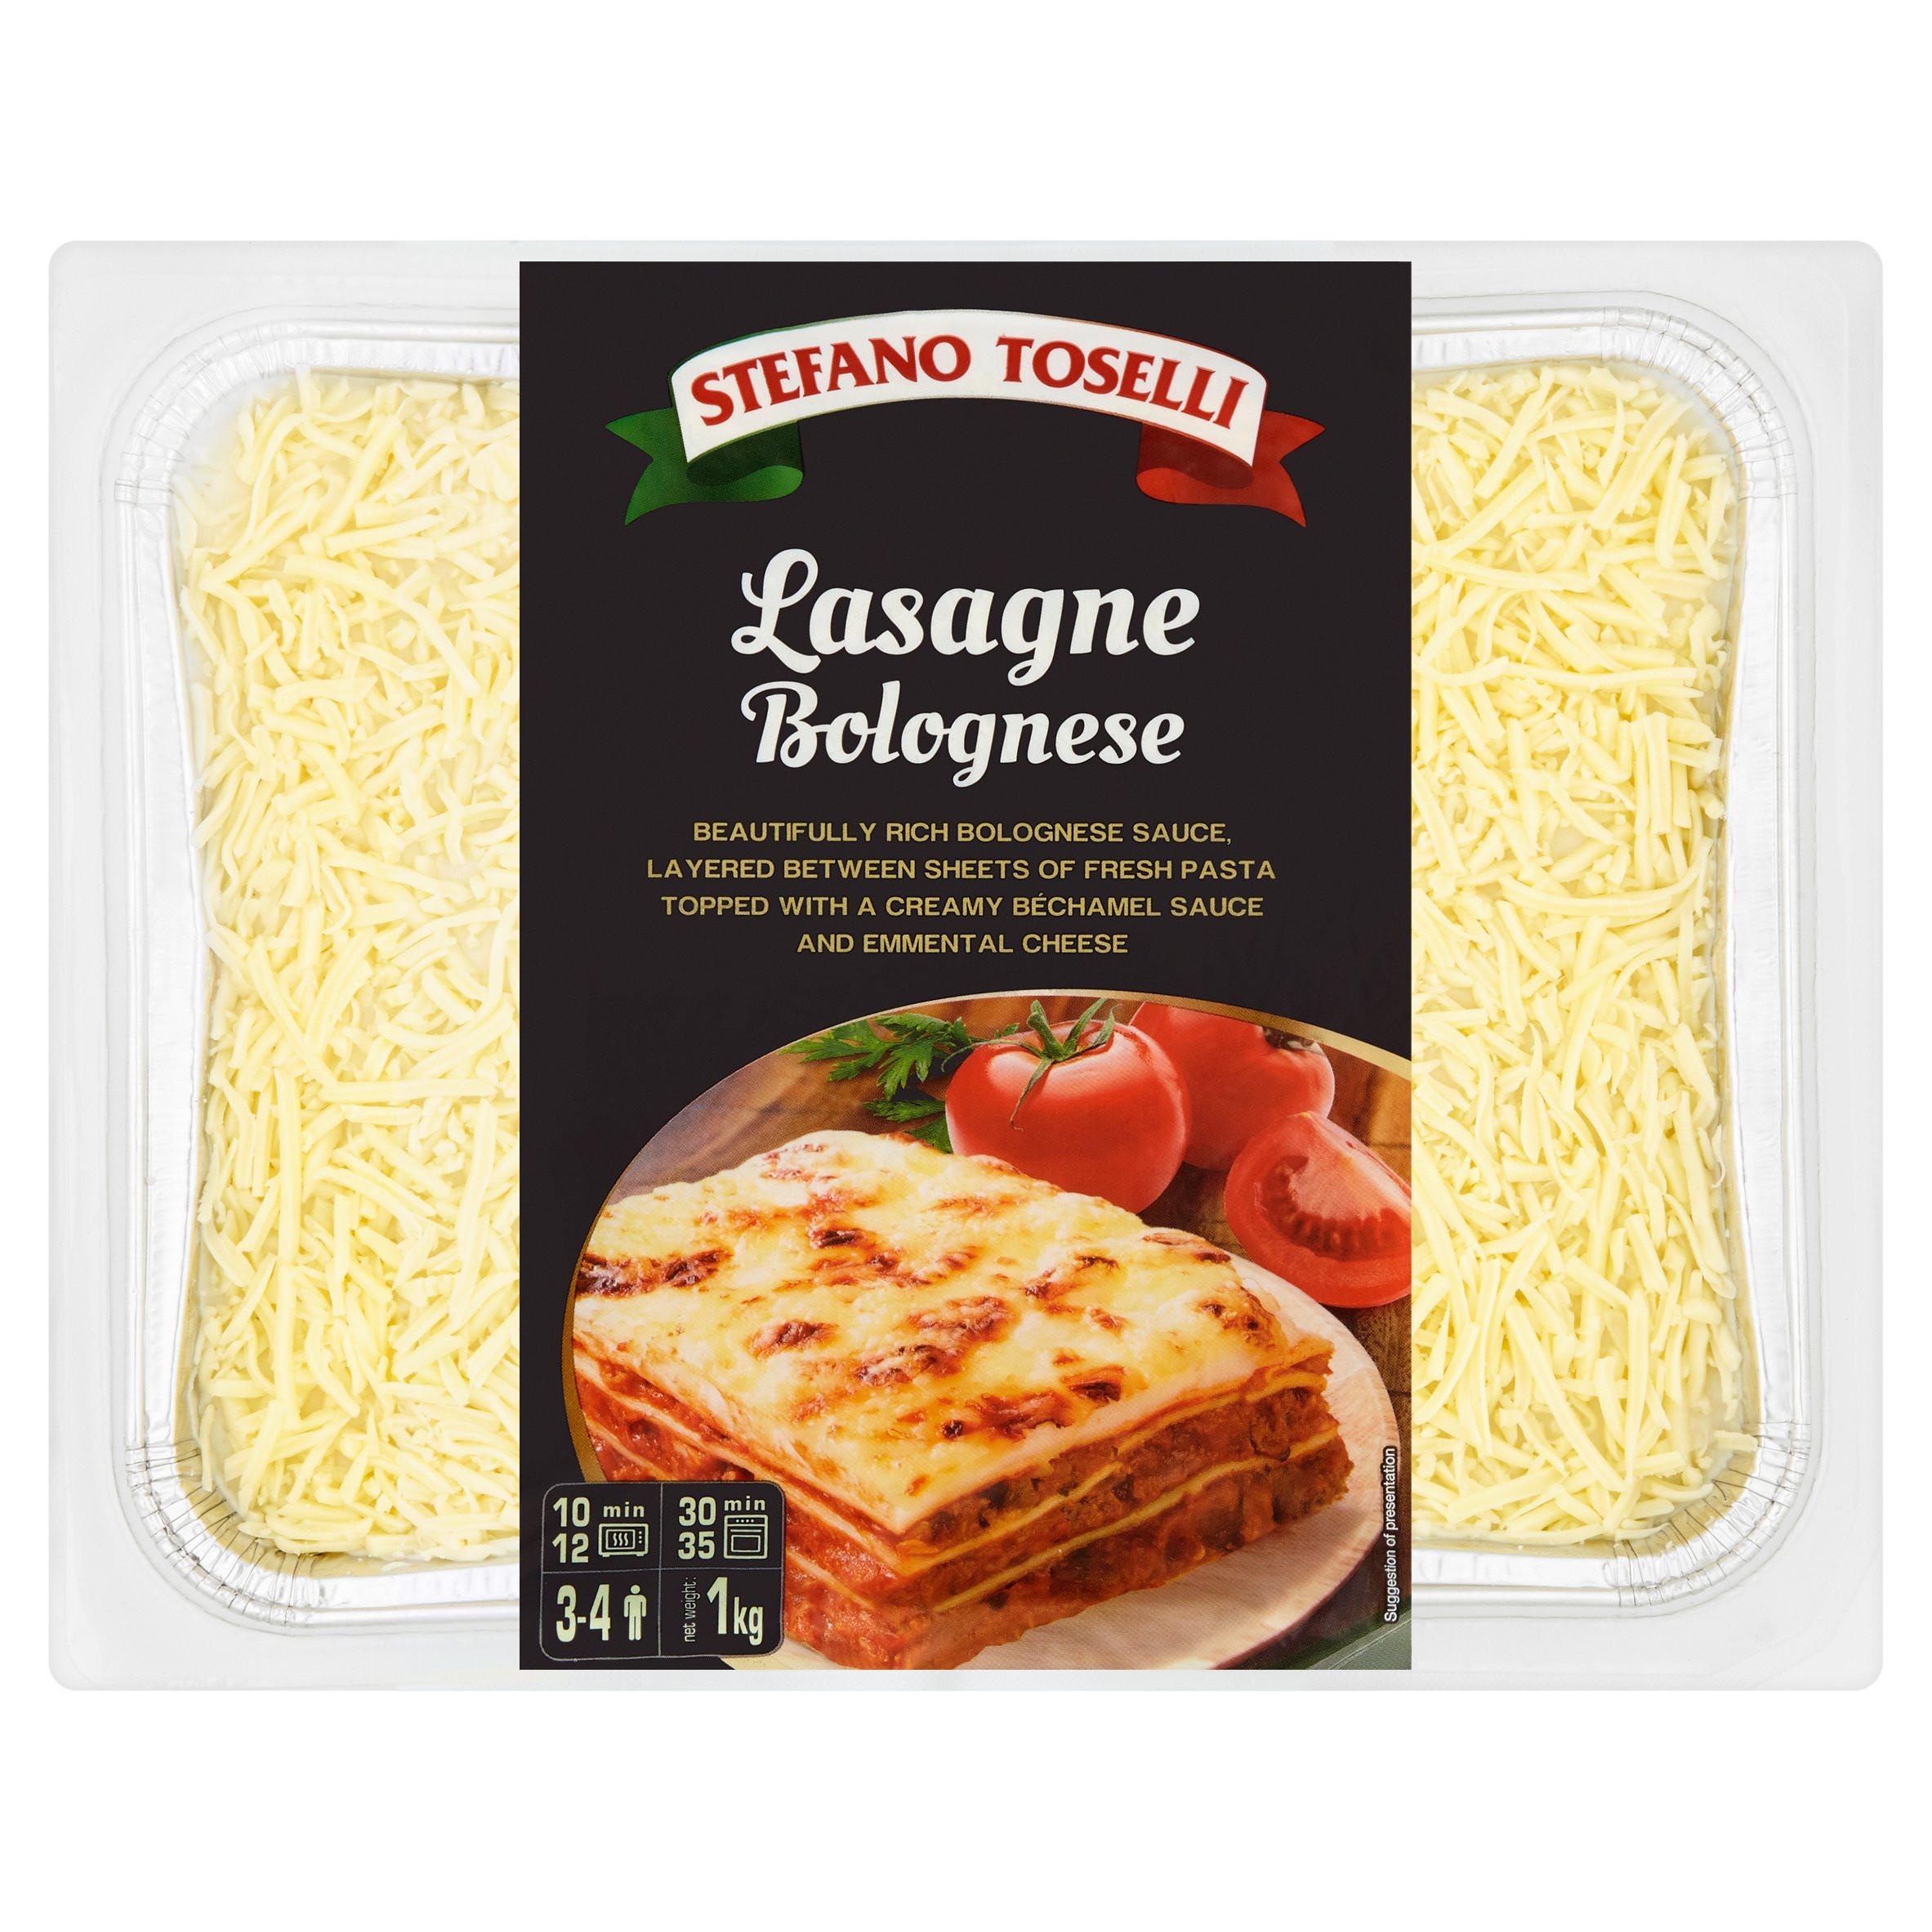 Stefano Toselli Lasagne Bolognese 1kg | Chilled Ready Meals & Snacks |  Iceland Foods